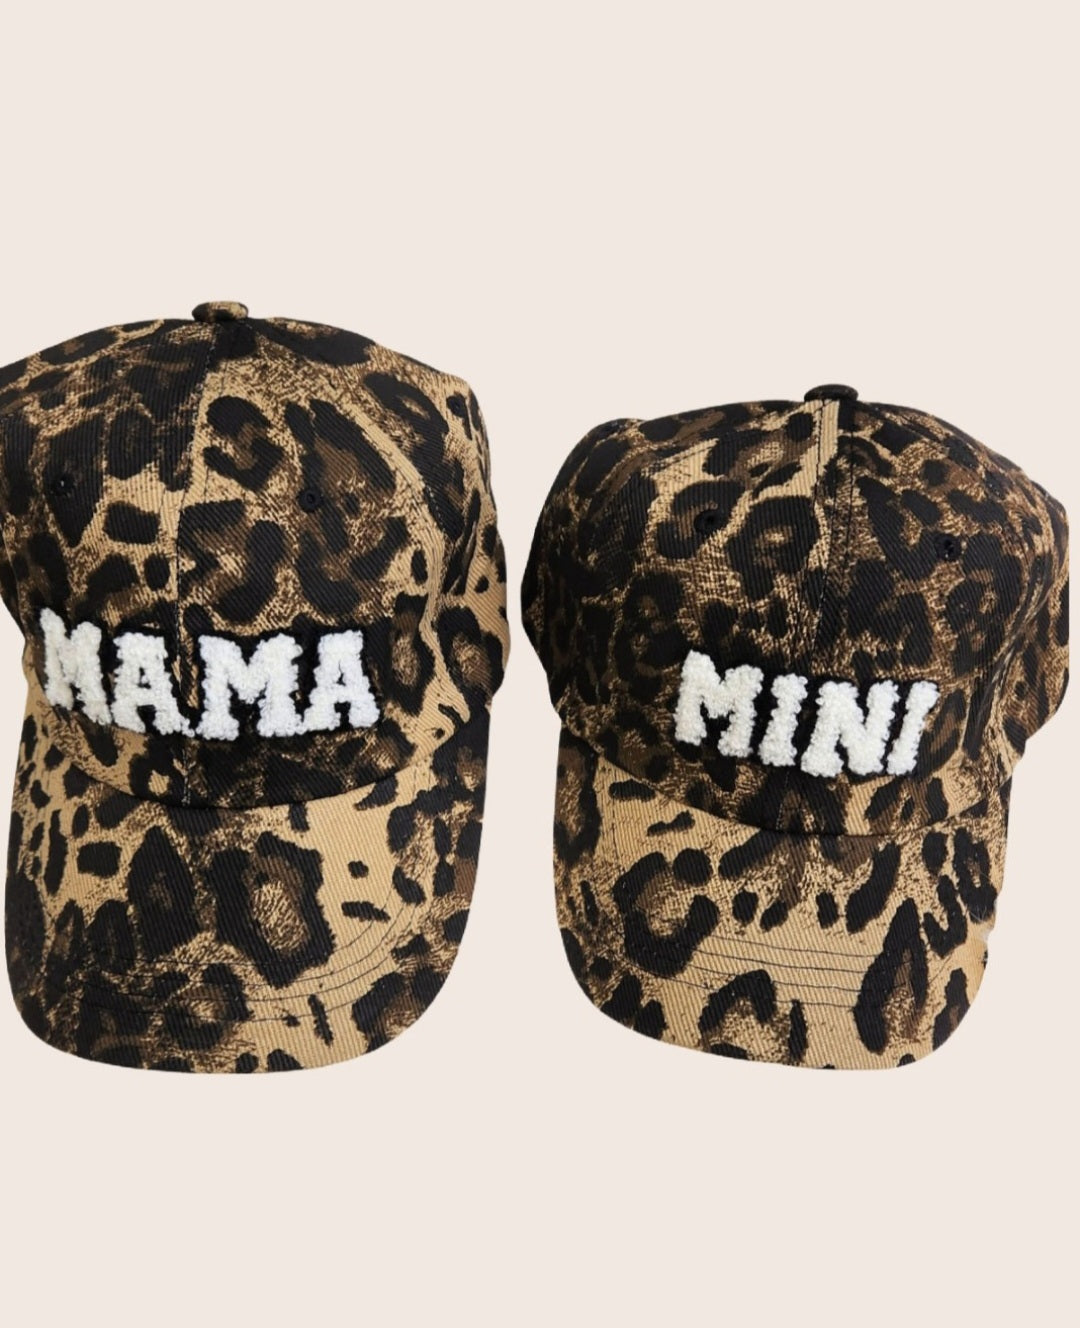 Leopard Print Mama and Mini Matching Hats by The Rustic Redbud Boutique | The Rustic Redbud Boutique